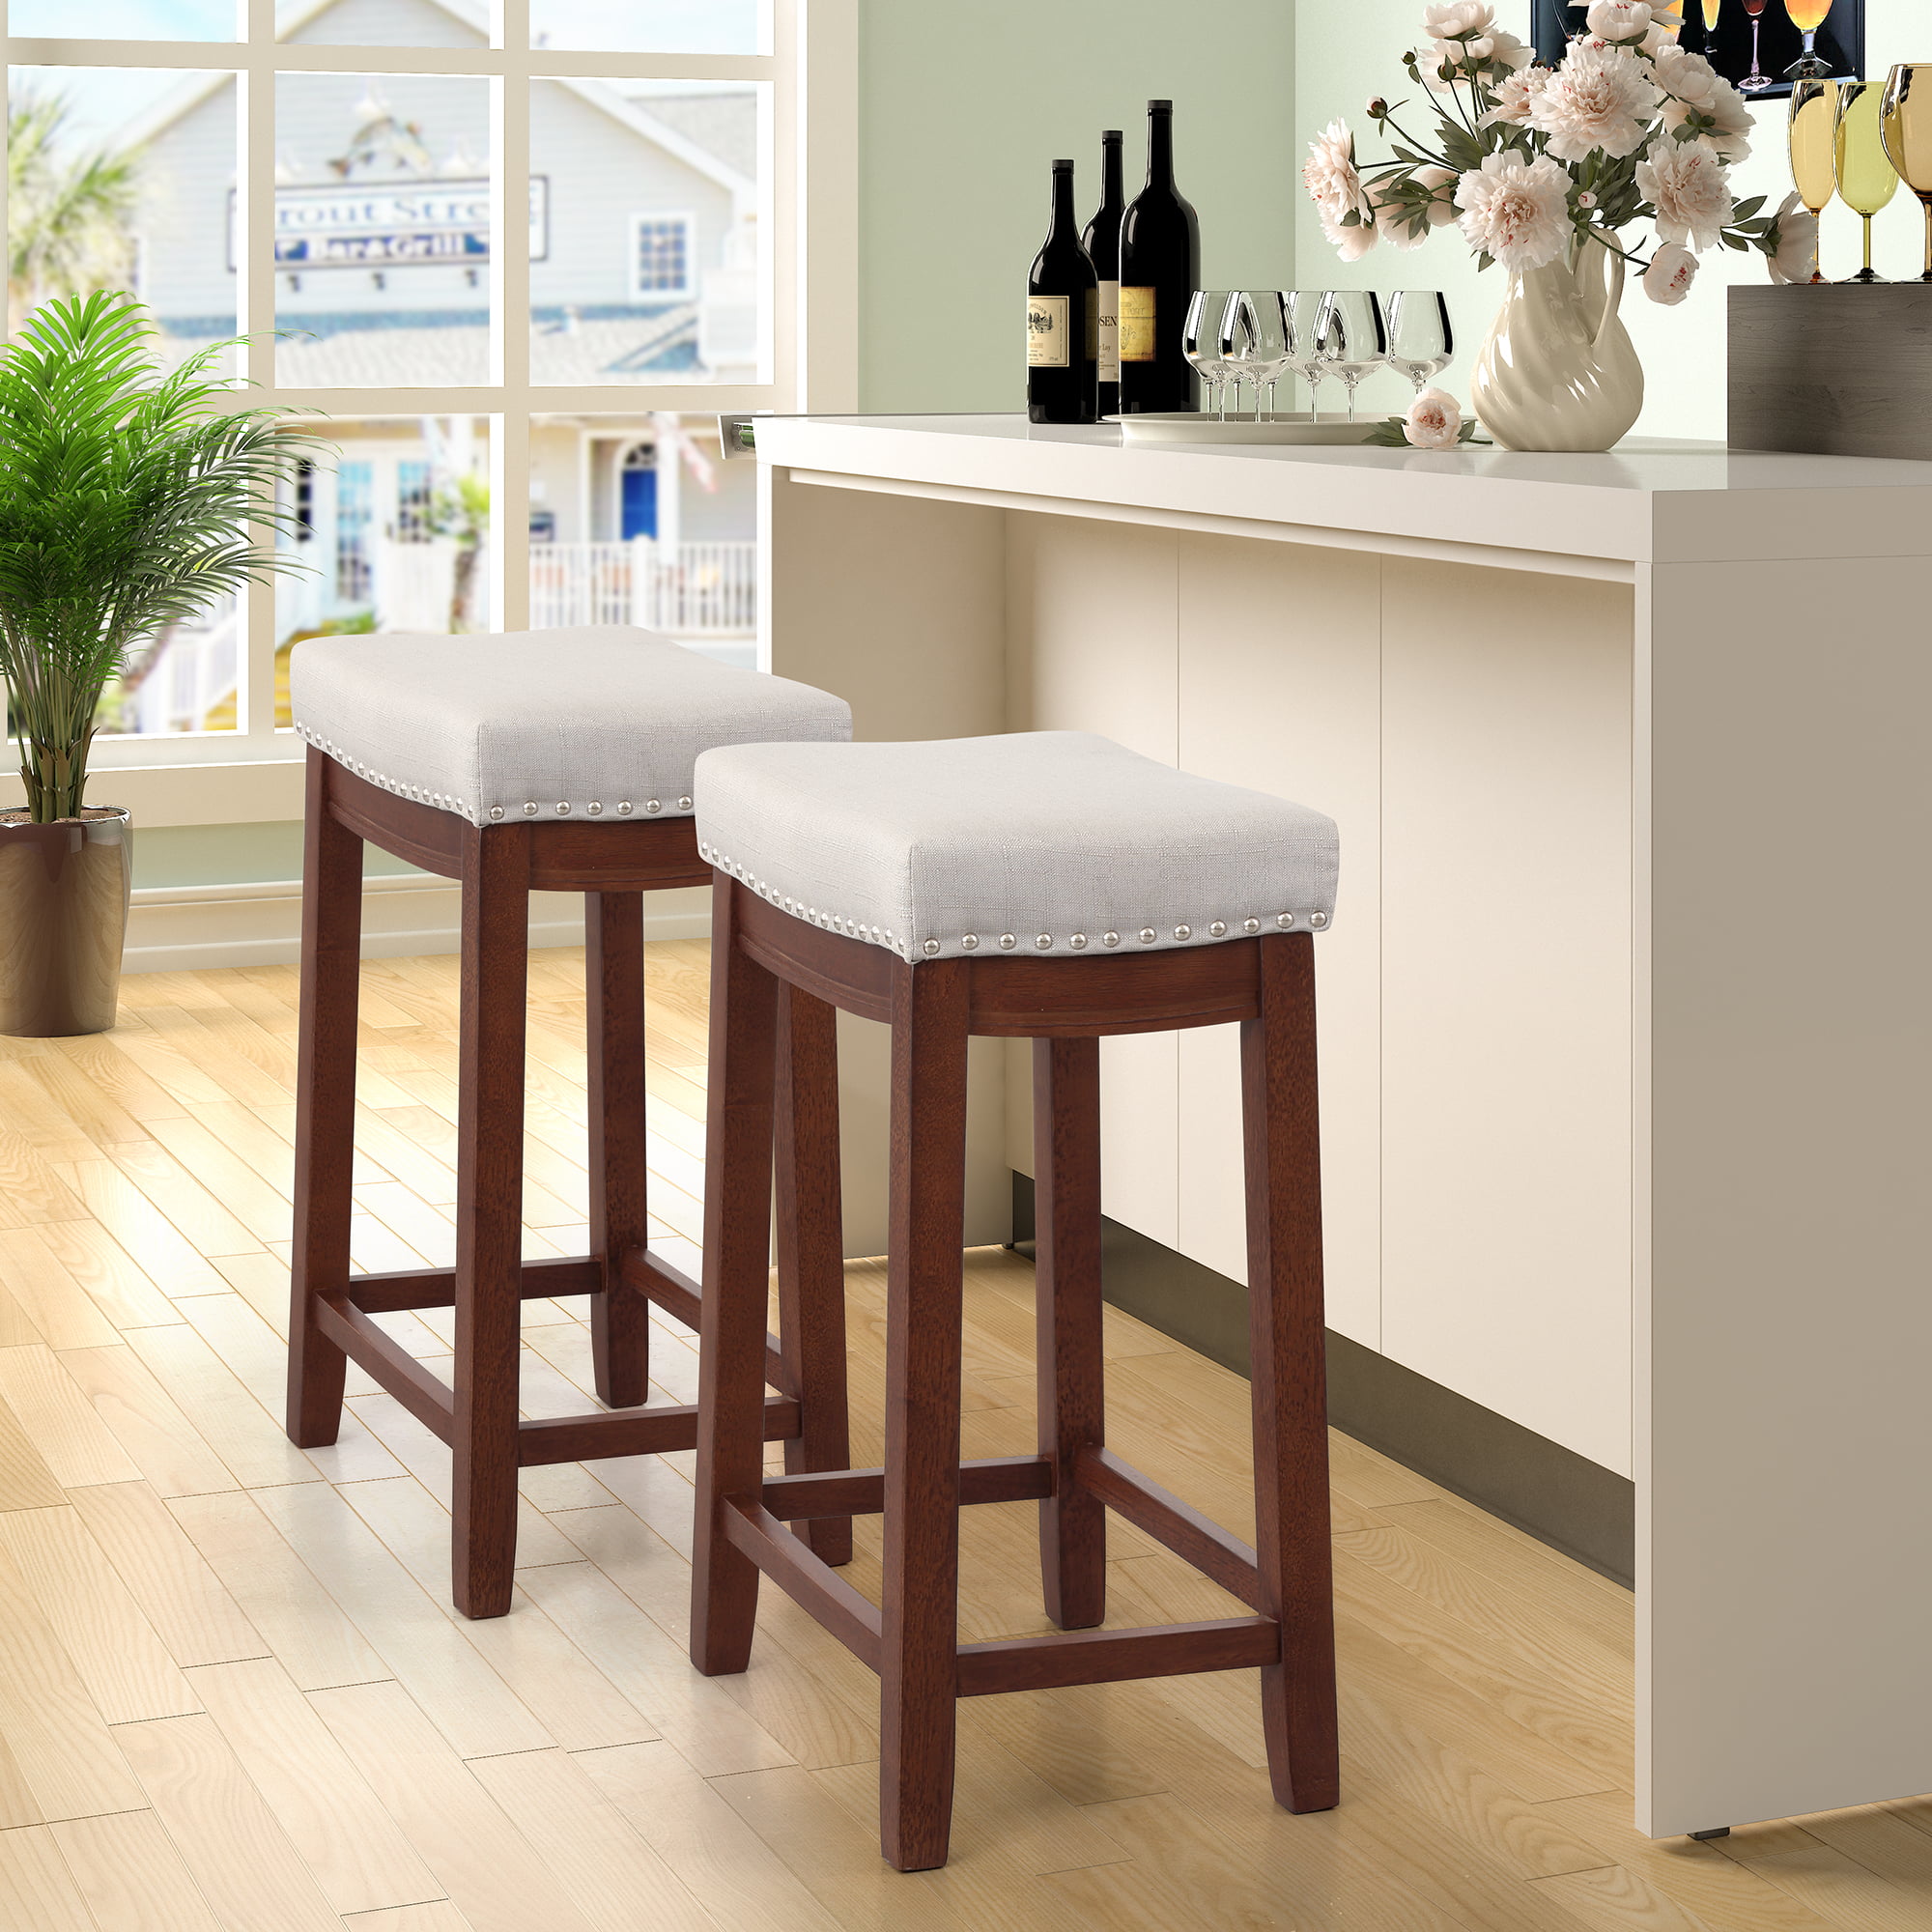 bar stools clearance - Living Room Solutions How to Design Small Spaces